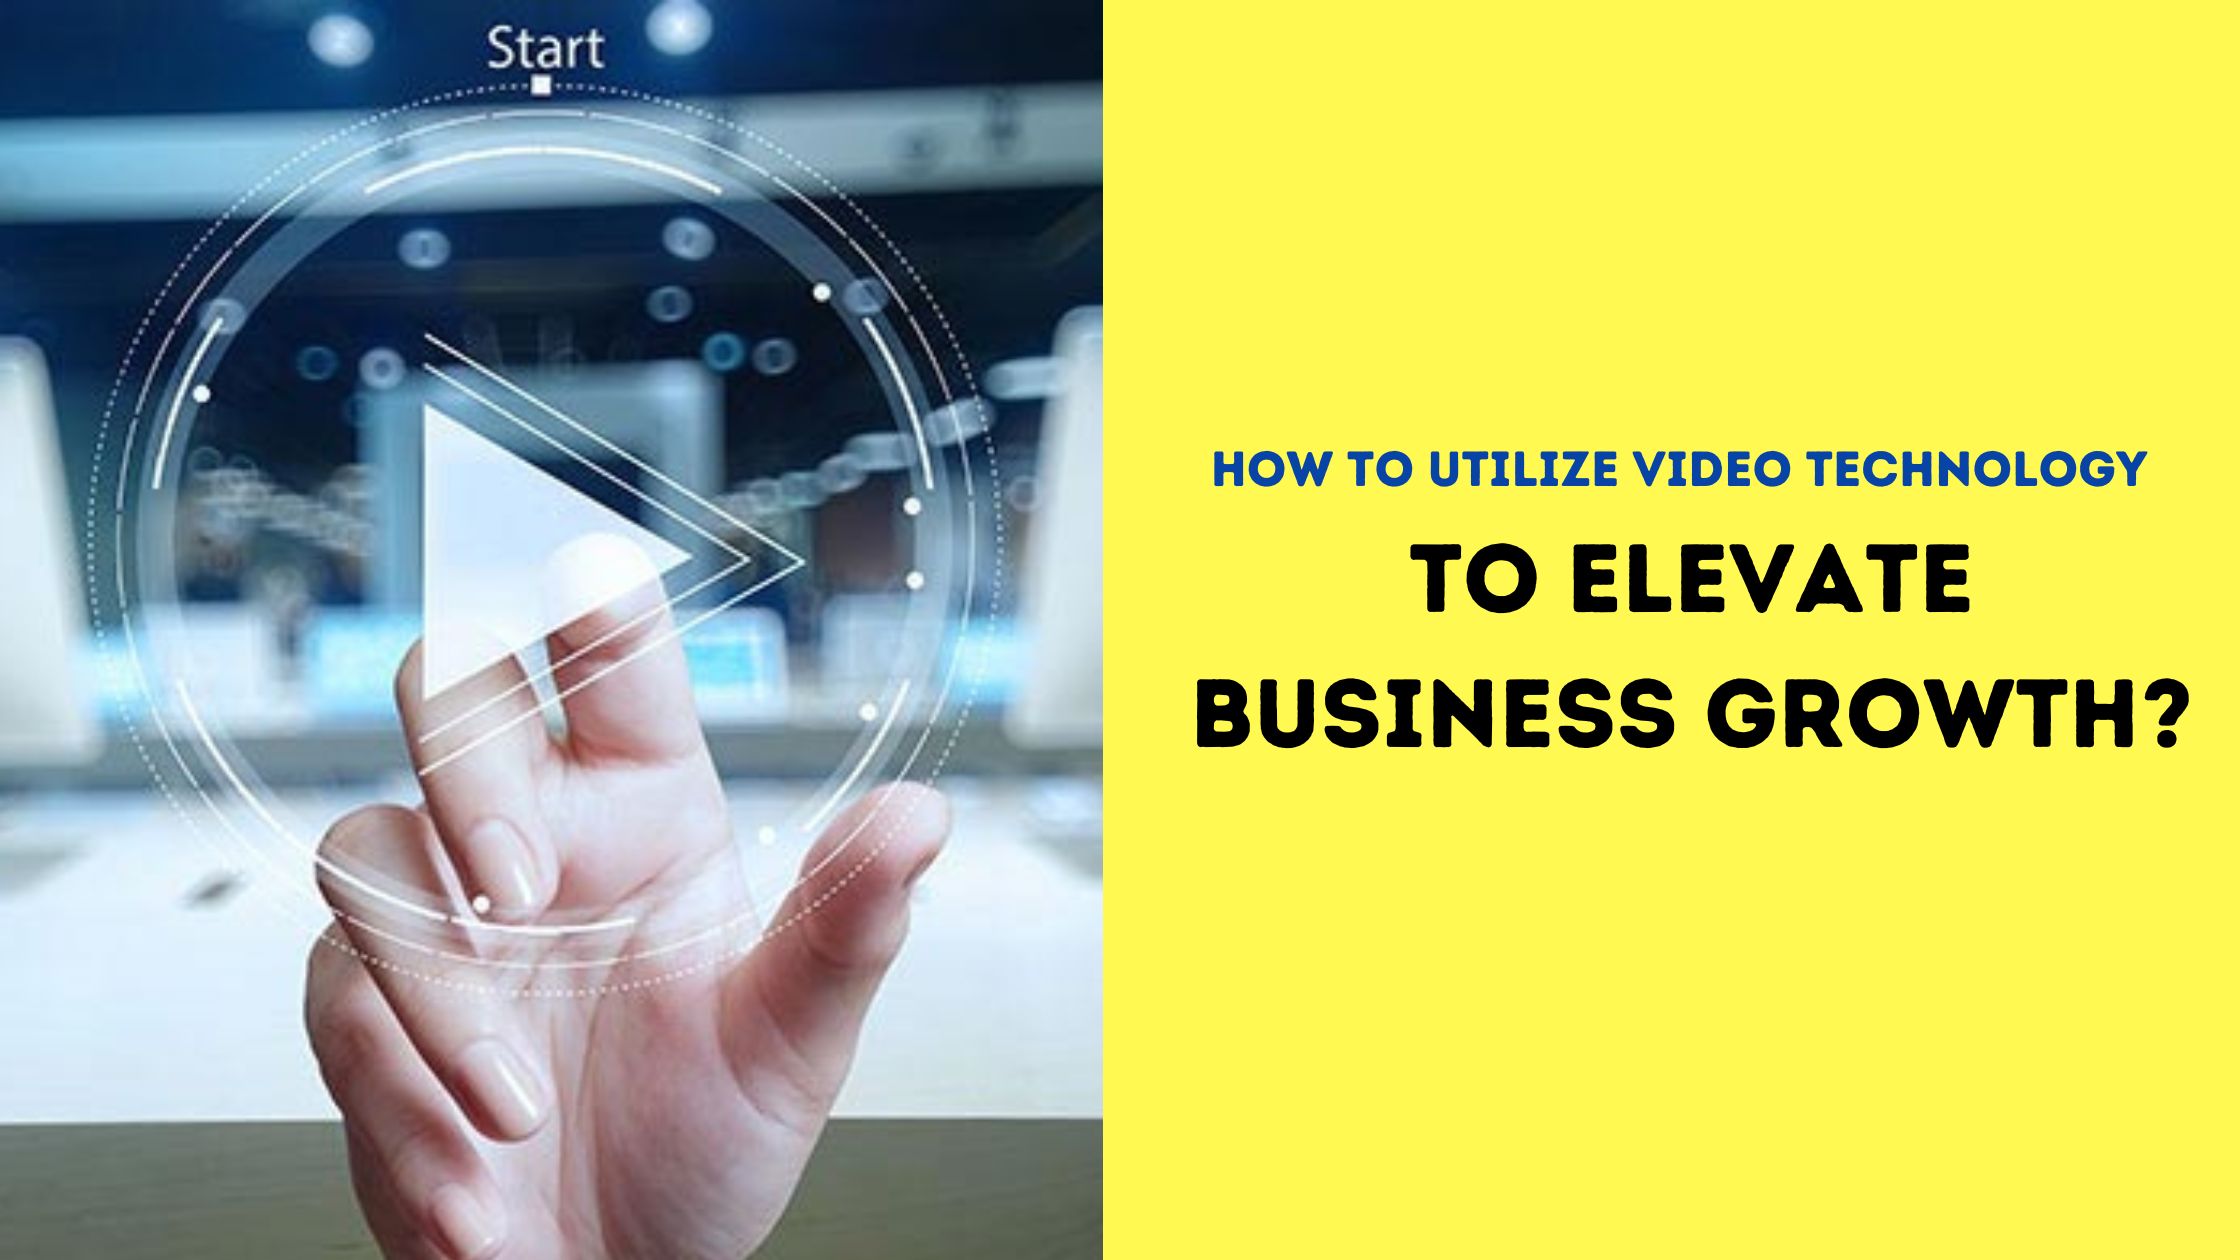 How to Utilize Video Technology to Elevate Business Growth?